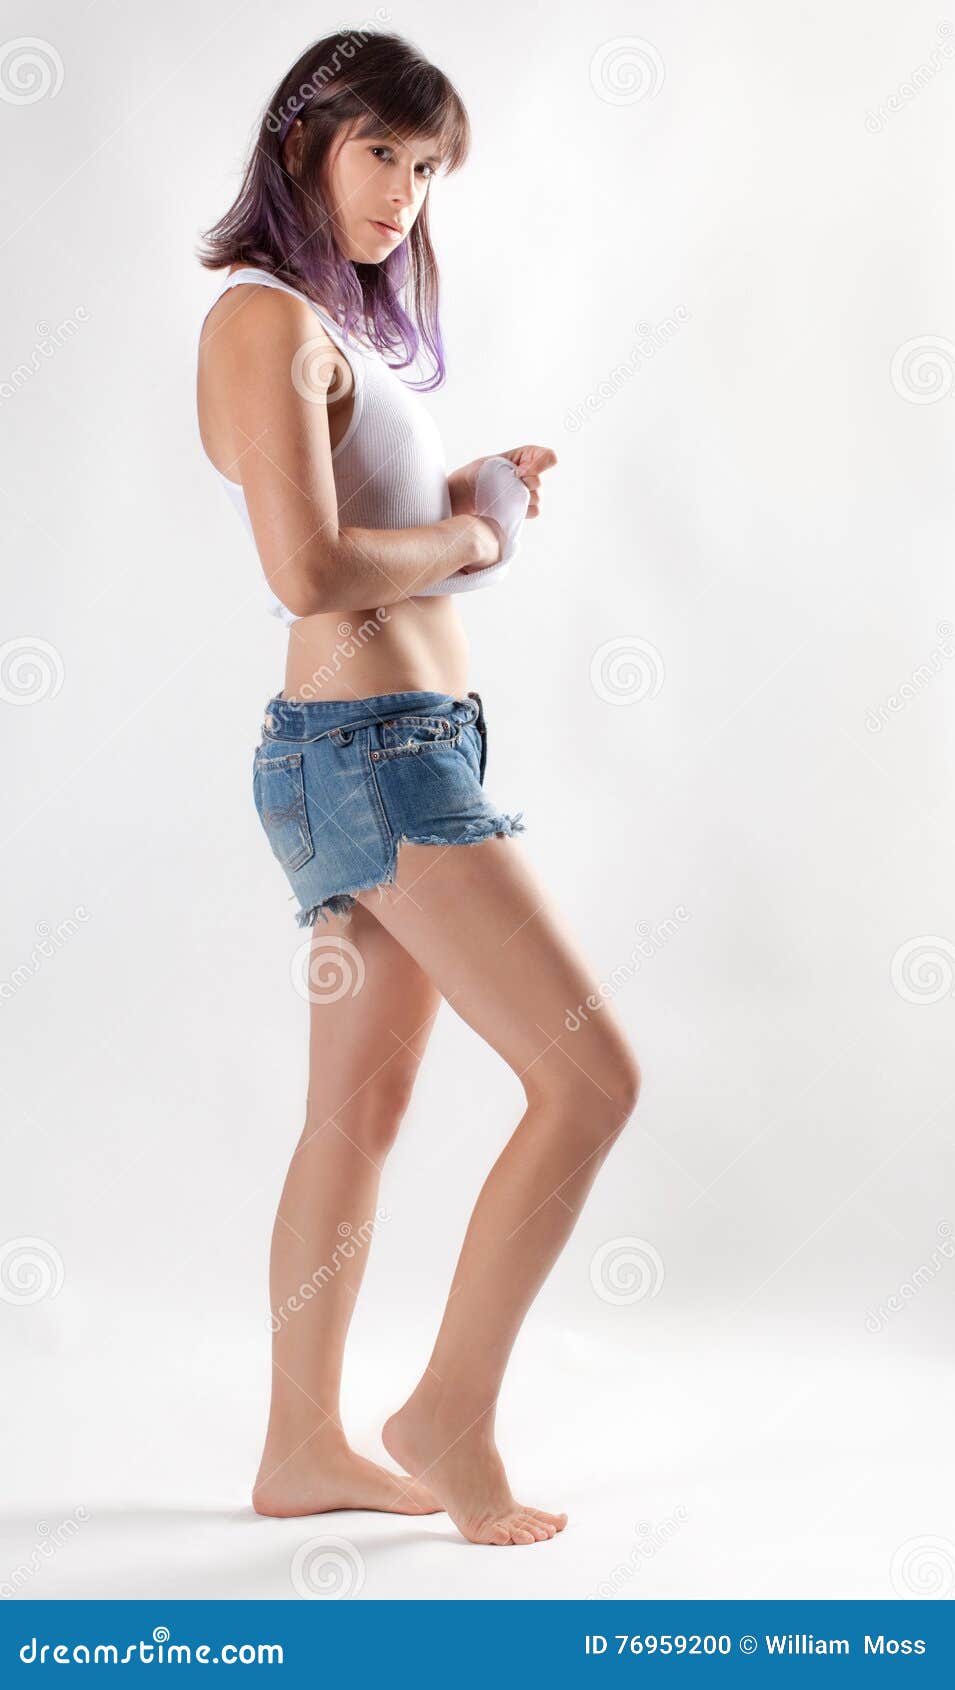 https://thumbs.dreamstime.com/z/woman-white-tank-top-jean-shorts-image-young-fit-wearing-short-76959200.jpg